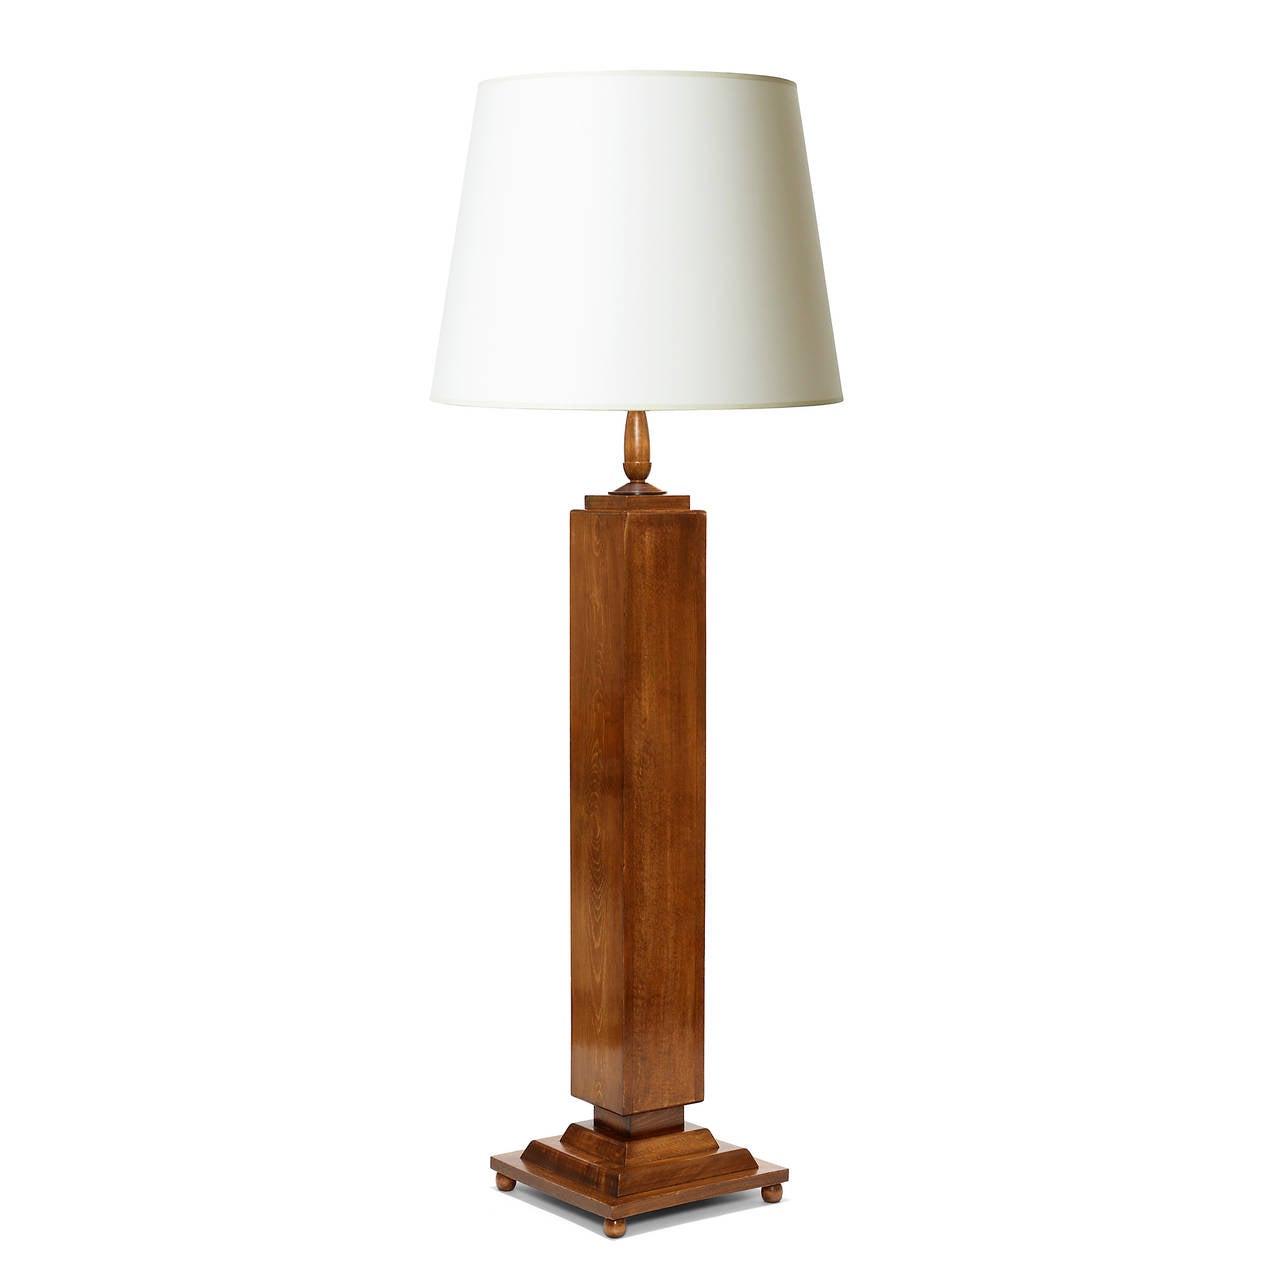 French Standing Lamp with Integrated Storage in Beech by DIM For Sale